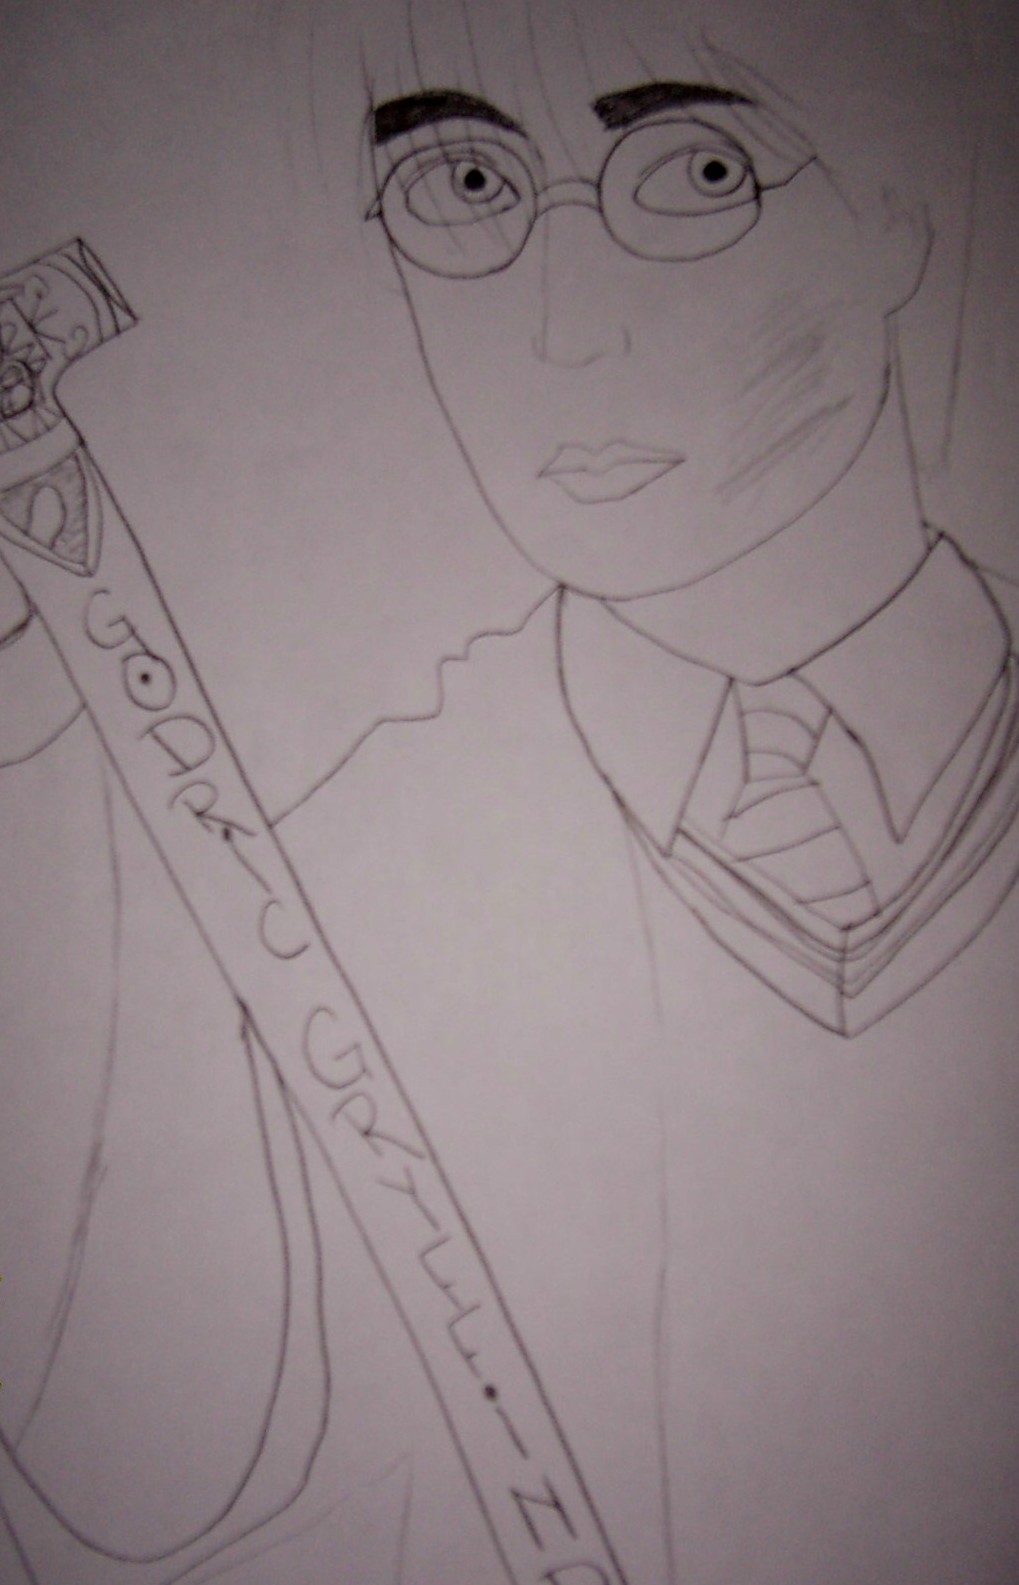 Harry with Godric's sword by pansyparkinson1313